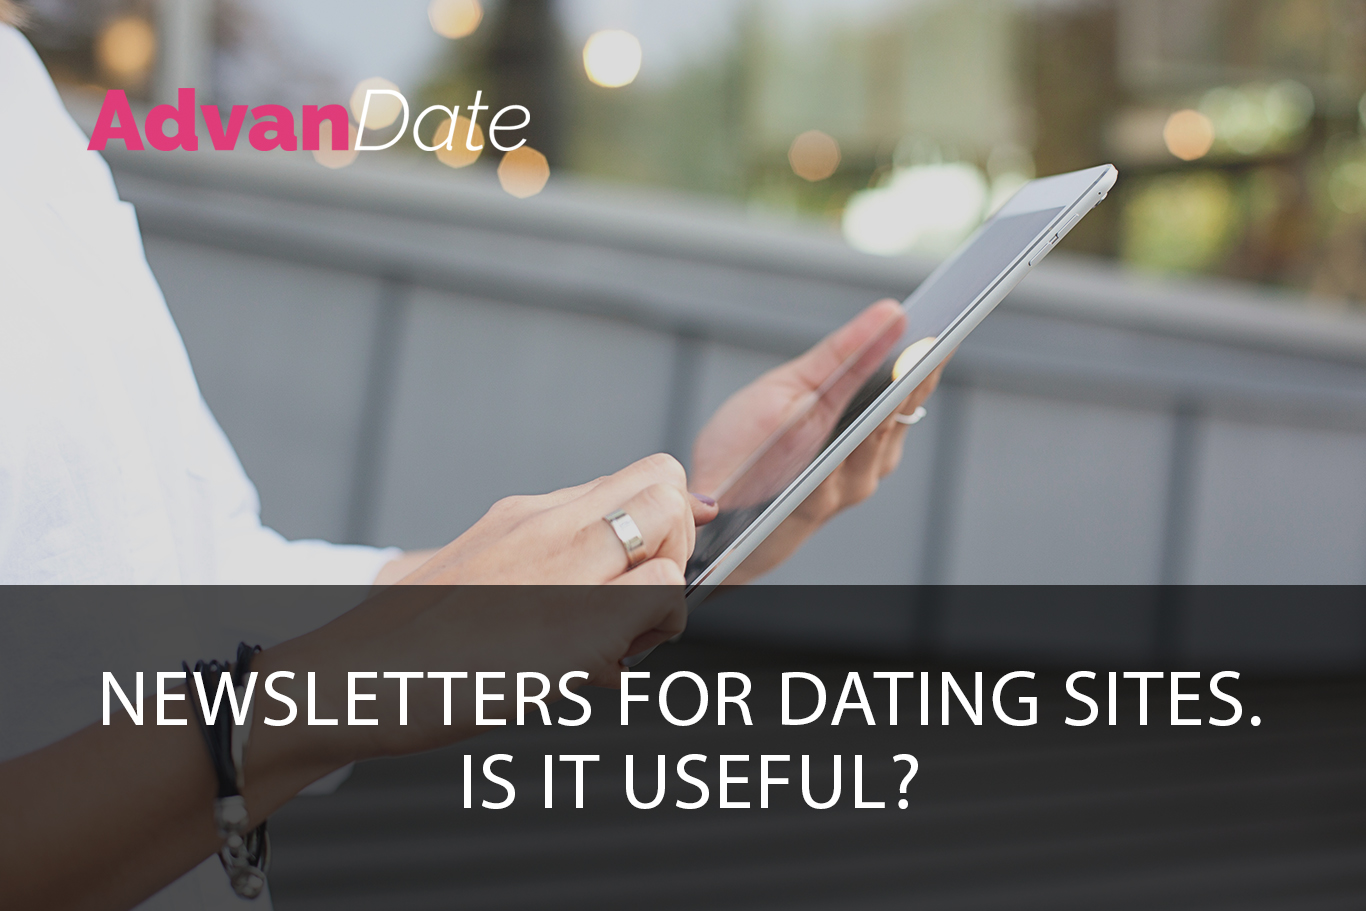 Newsletters for dating sites. Is it useful?